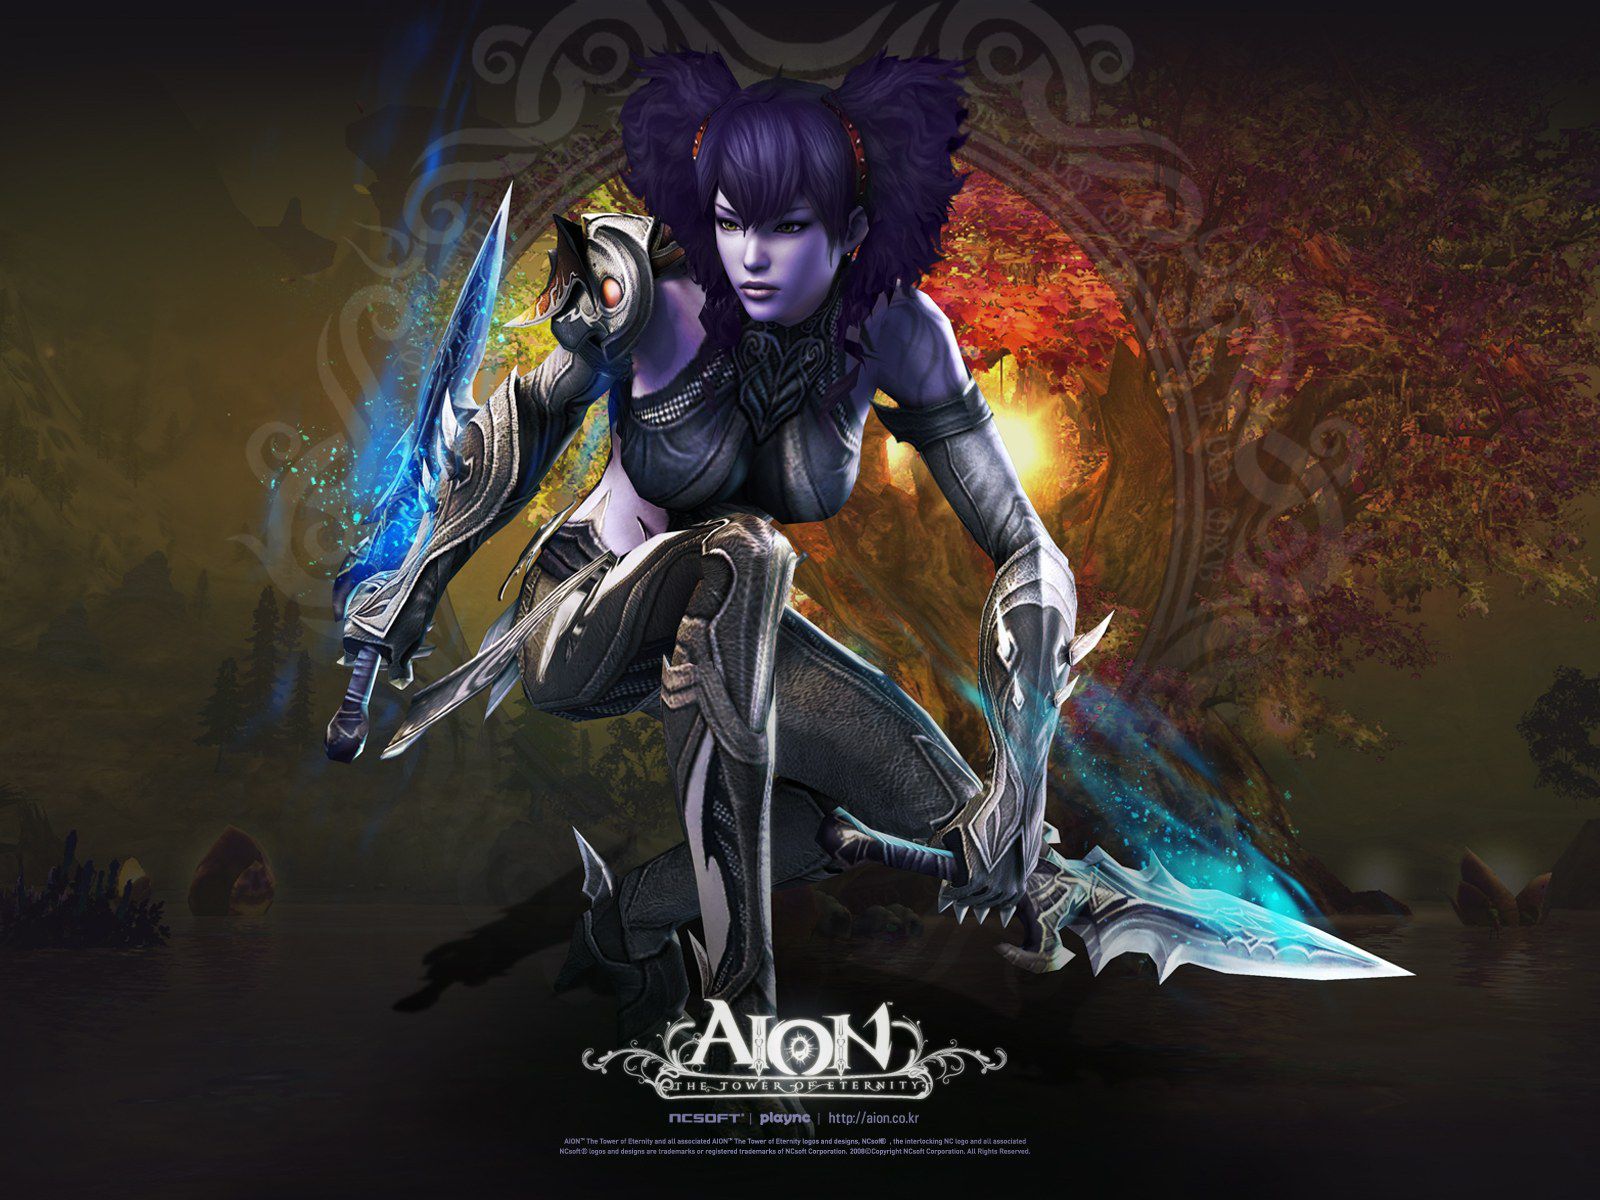 Download_Aion_Full_HD_Wallpapers-cgfrog_com_25